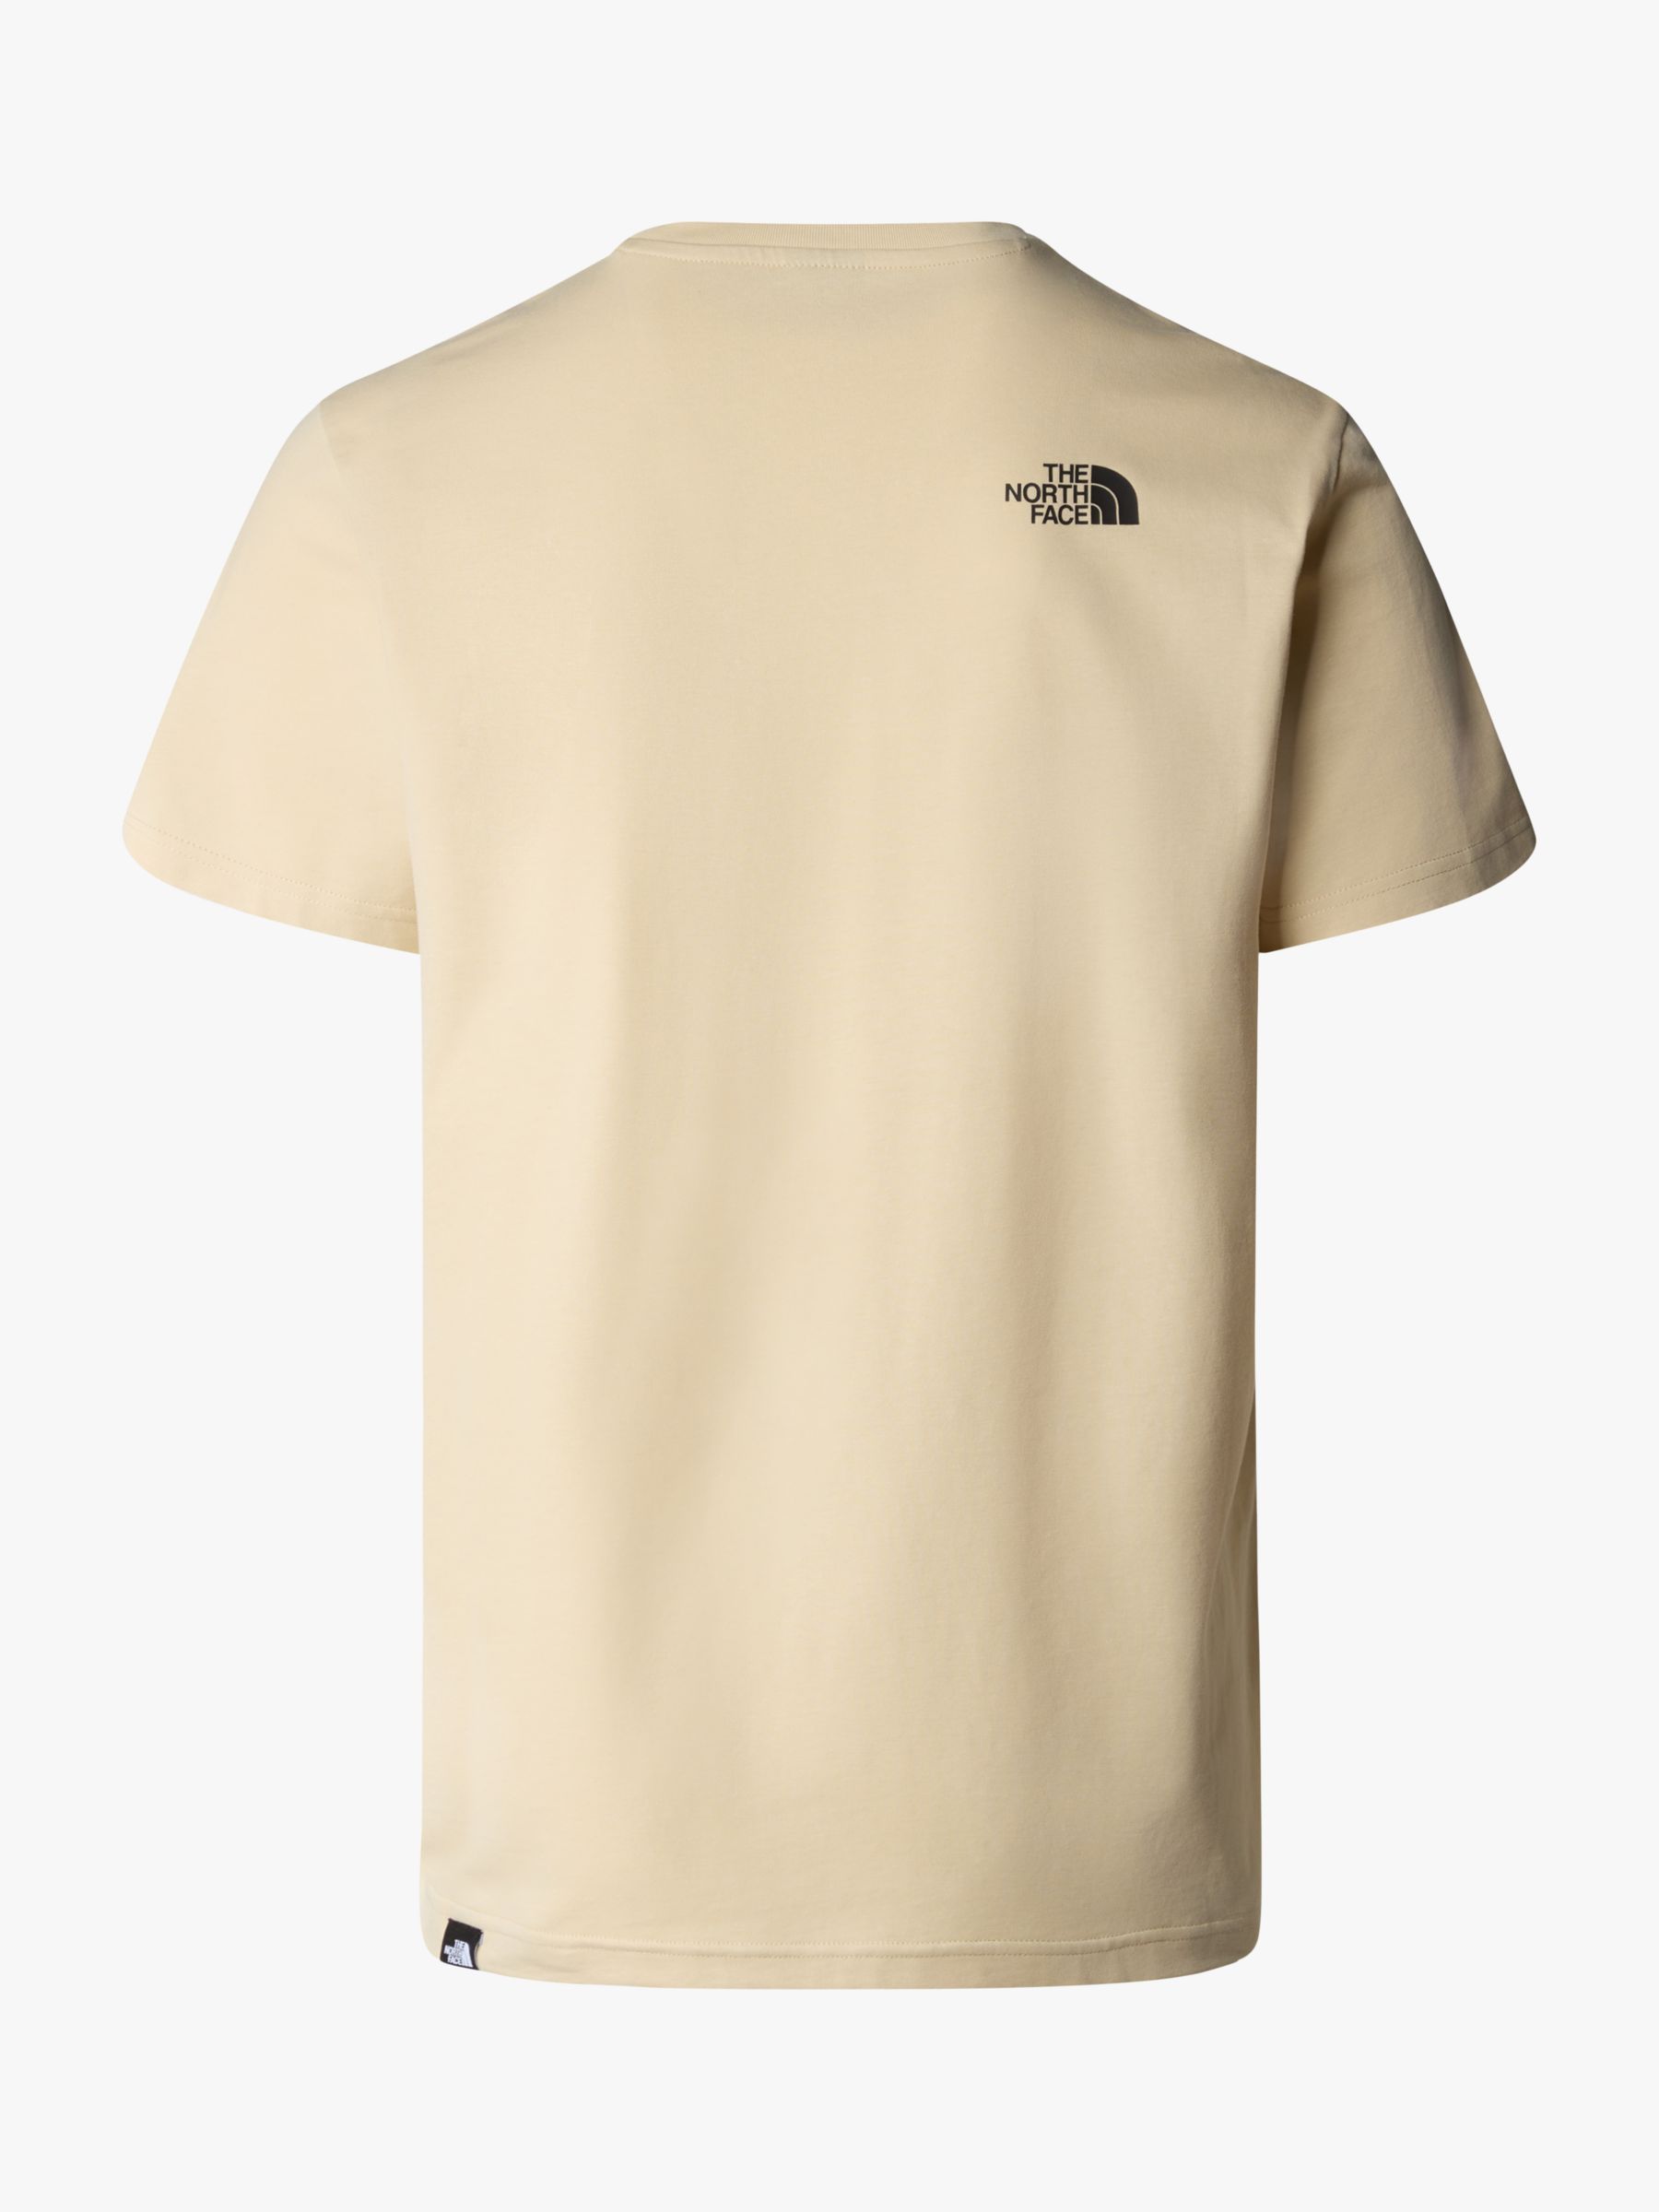 Buy The North Face Short Sleeve Dome T-Shirt Online at johnlewis.com